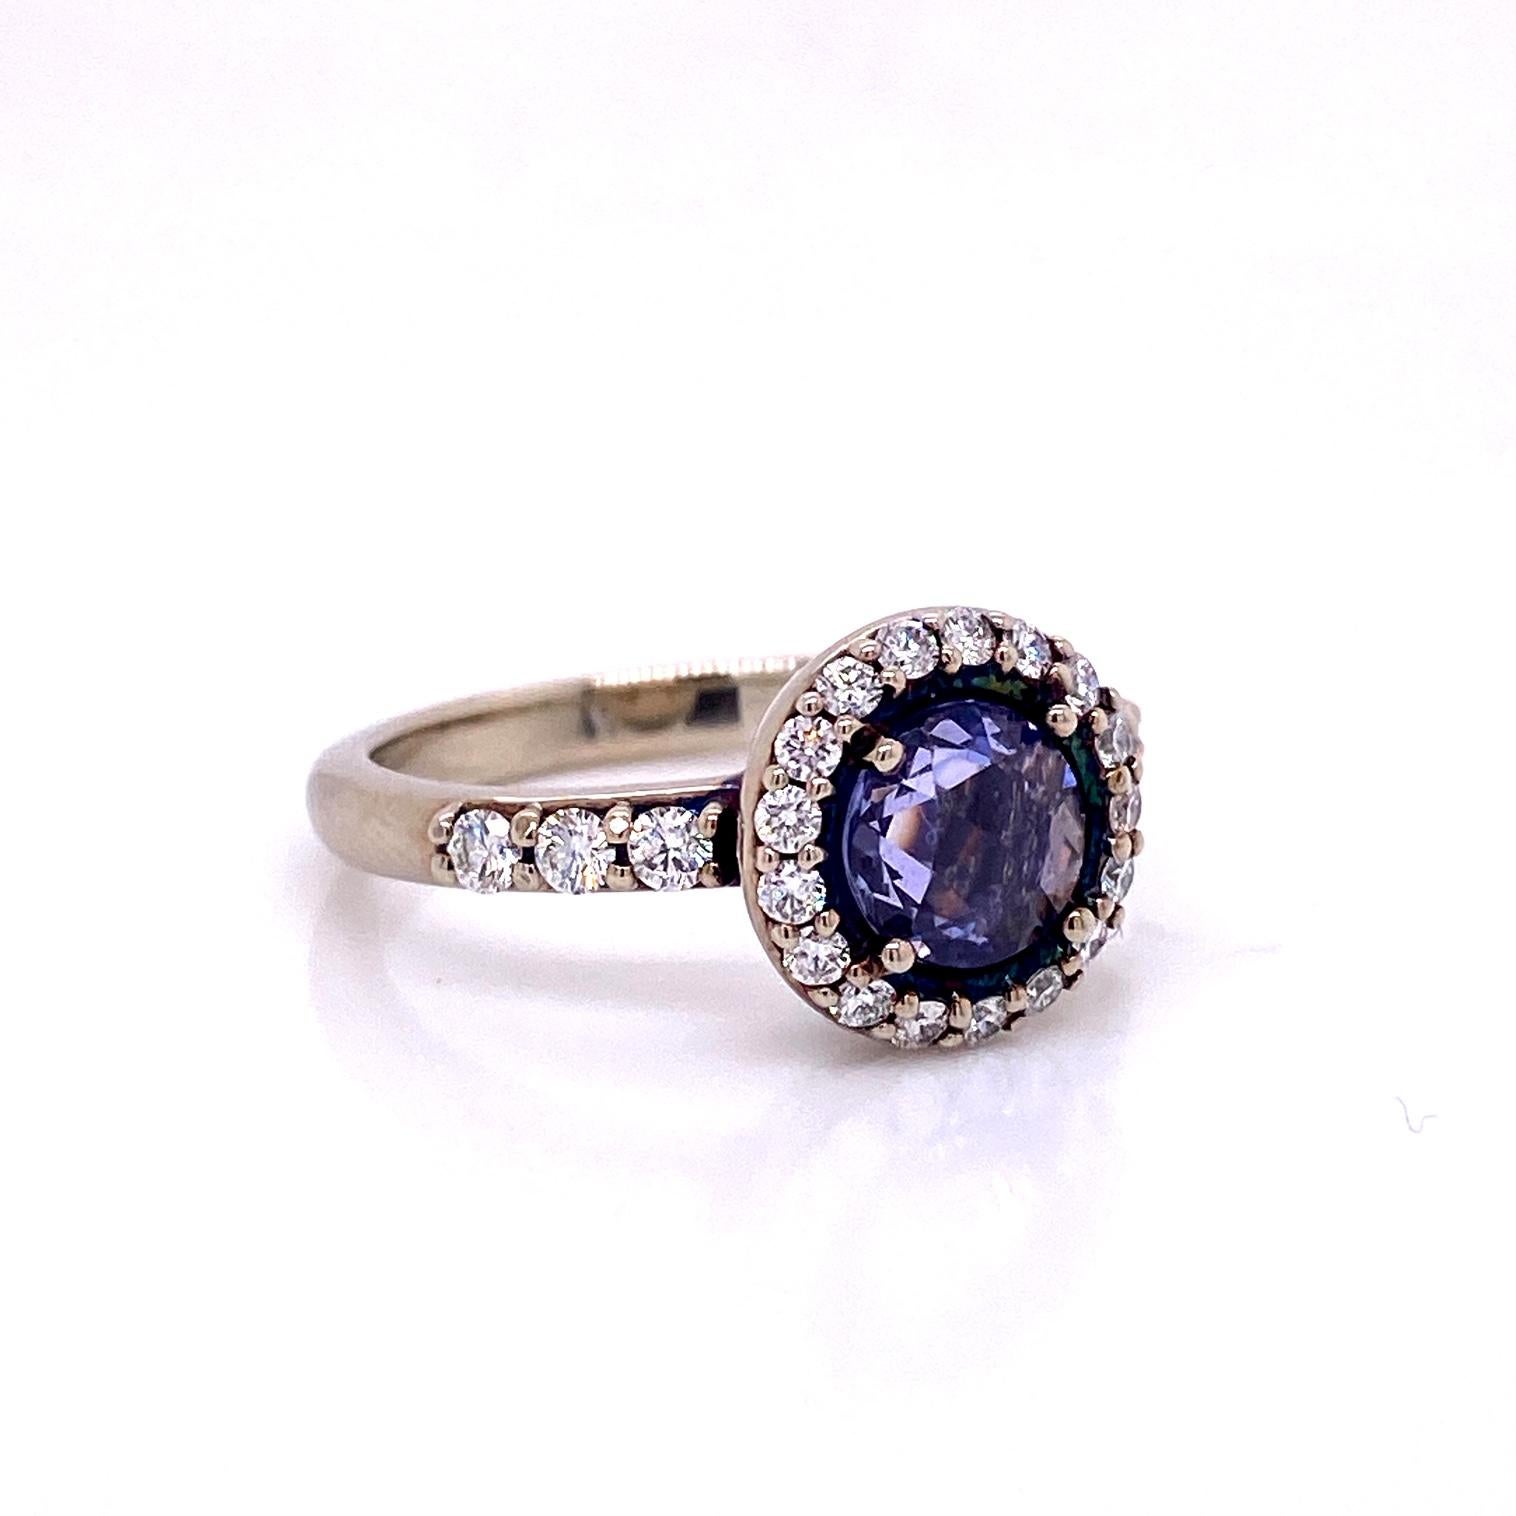 An 18k white gold ring set with a .88ct  rose cut purple sapphire with a halo of round full cut diamonds G to H color and VS clarity .42 carats. Ring size 6.5. This ring was made and designed and made by llyn strong.